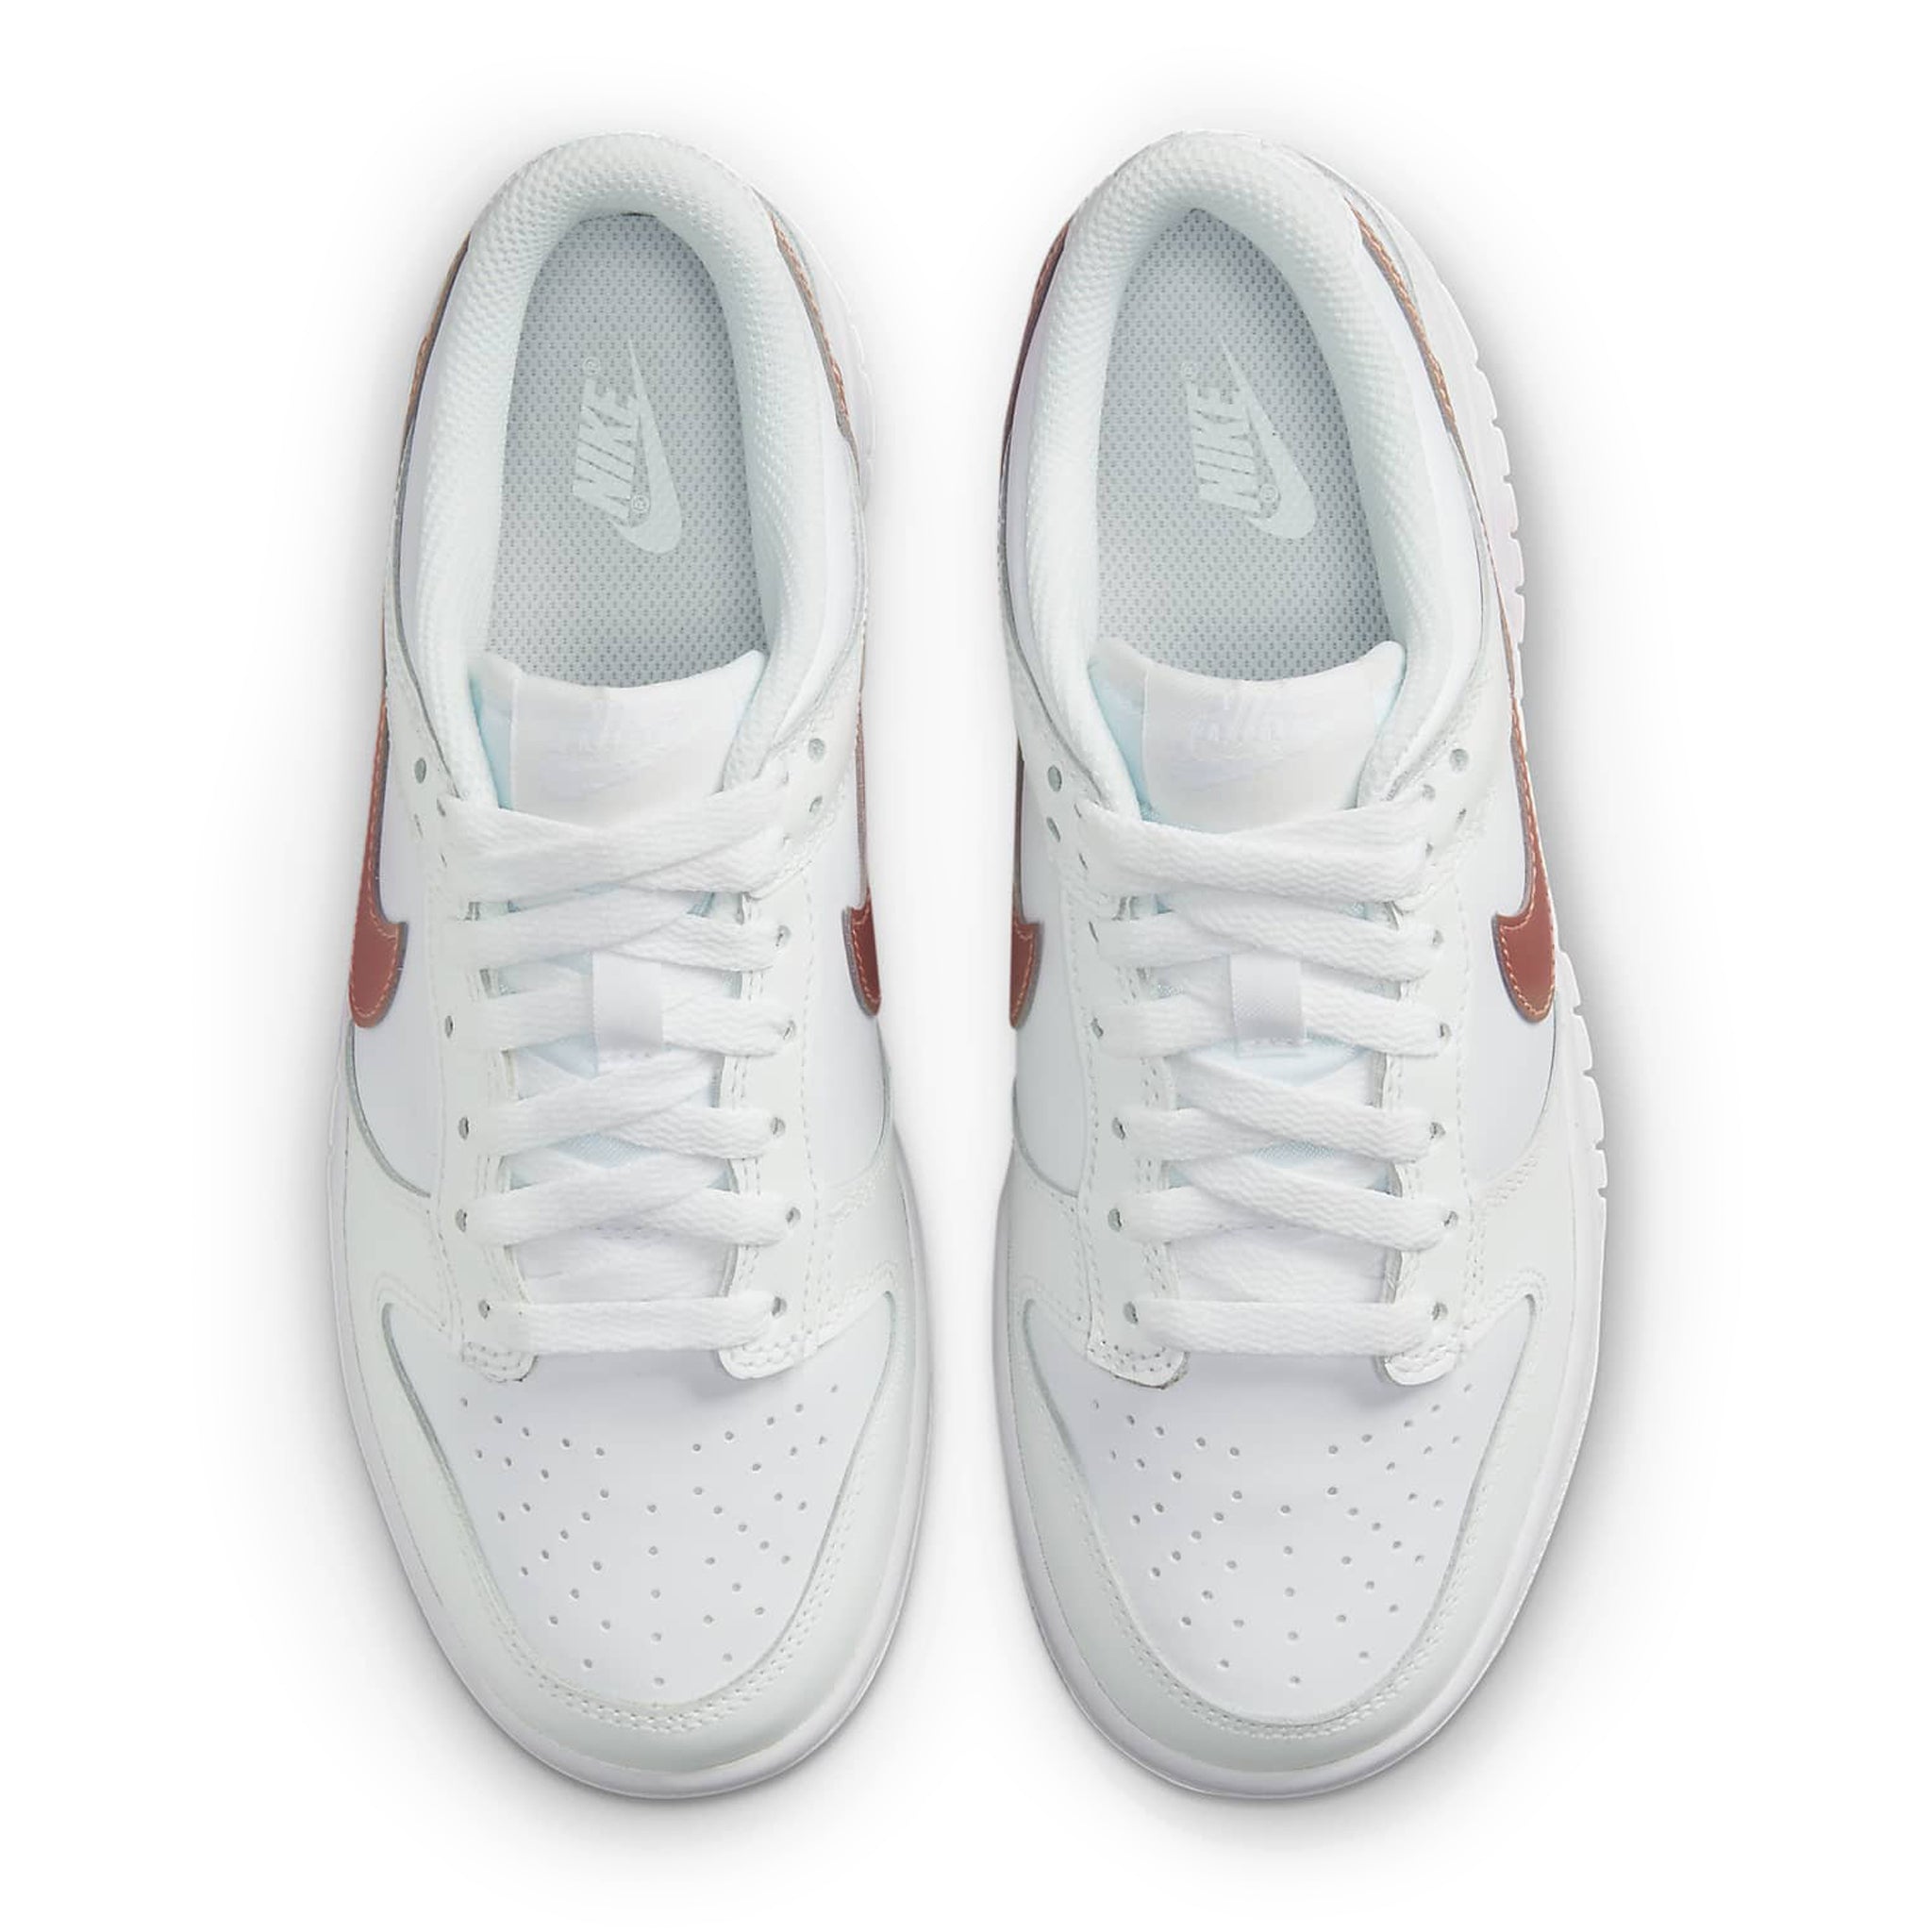 nike dunk low white pink gs dh9765 100 top